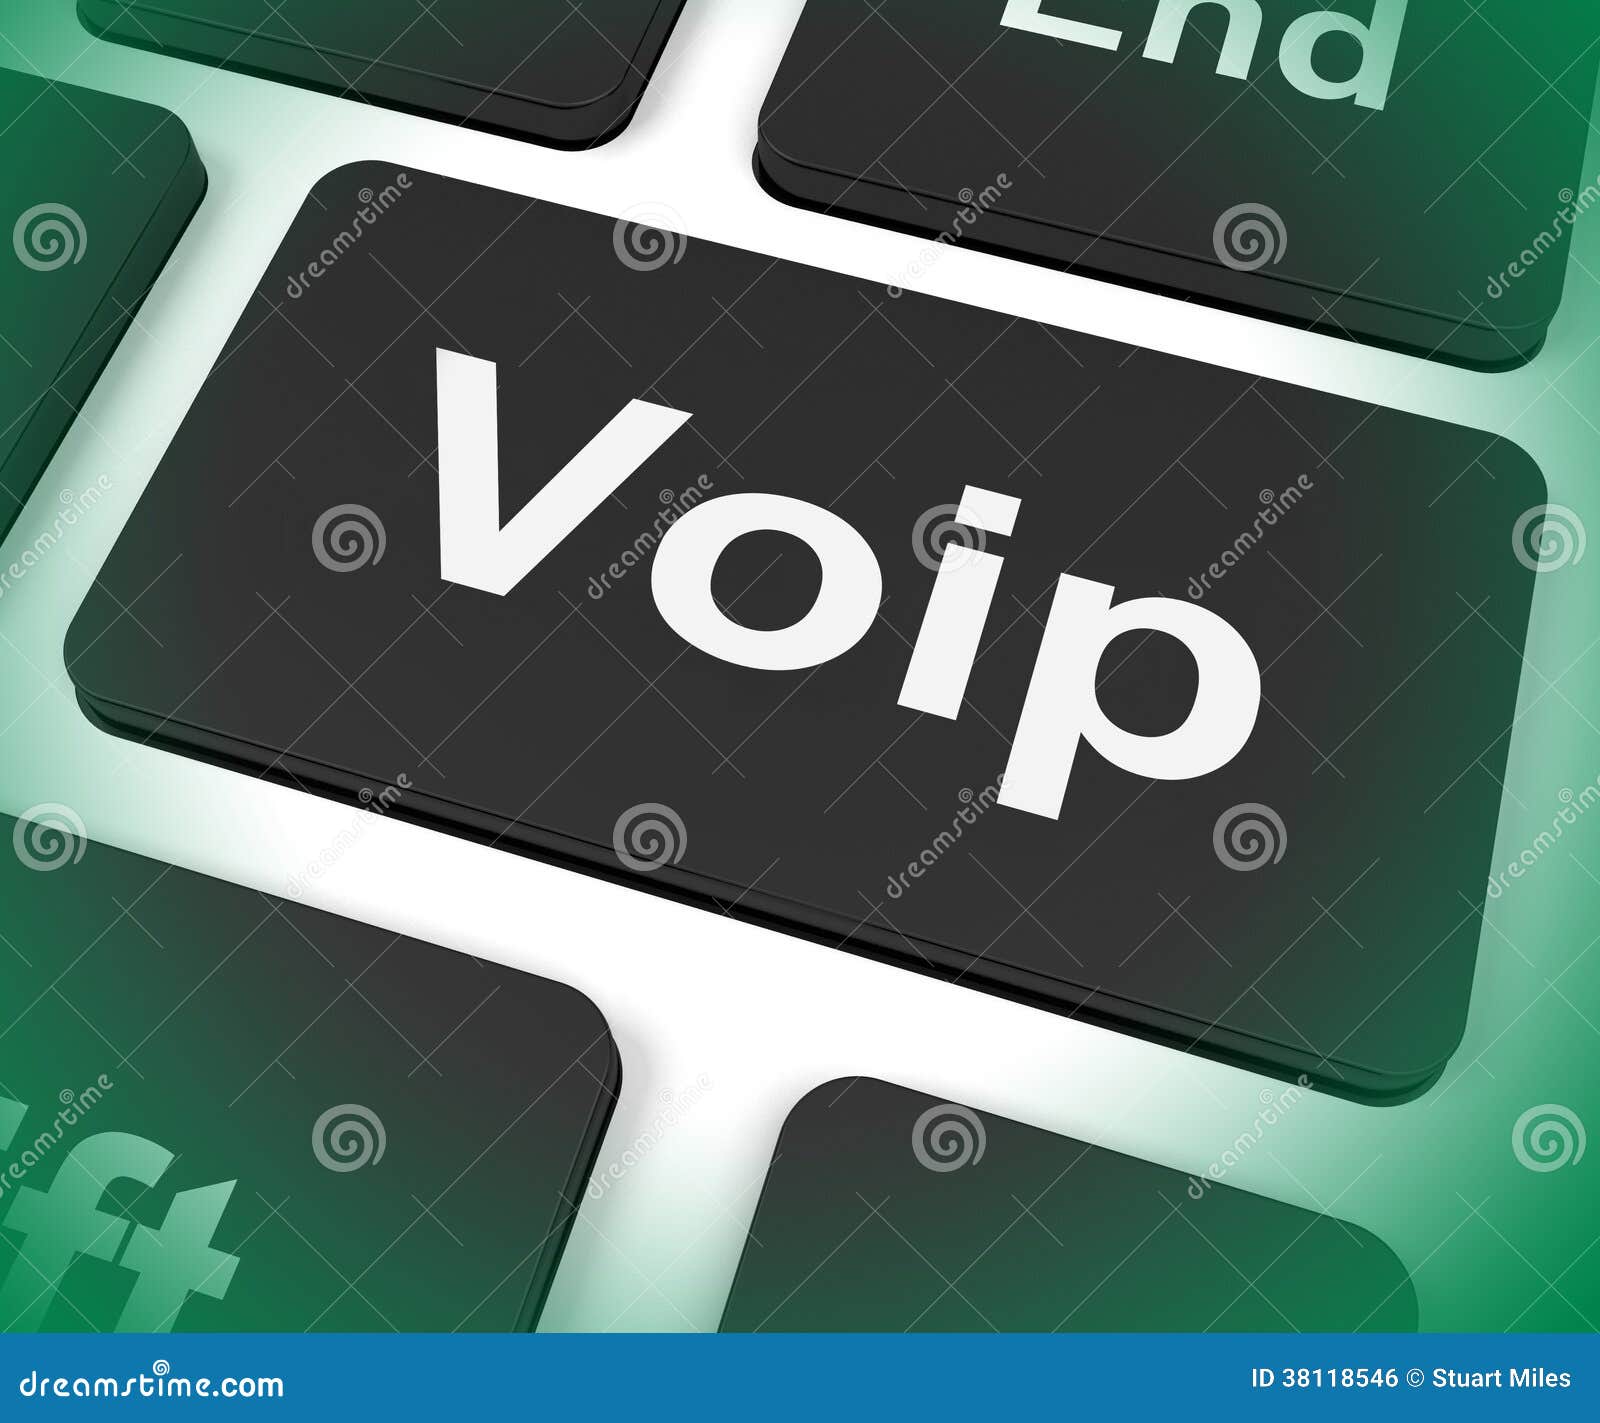 voip key means voice over internet protocol or broadband telephony